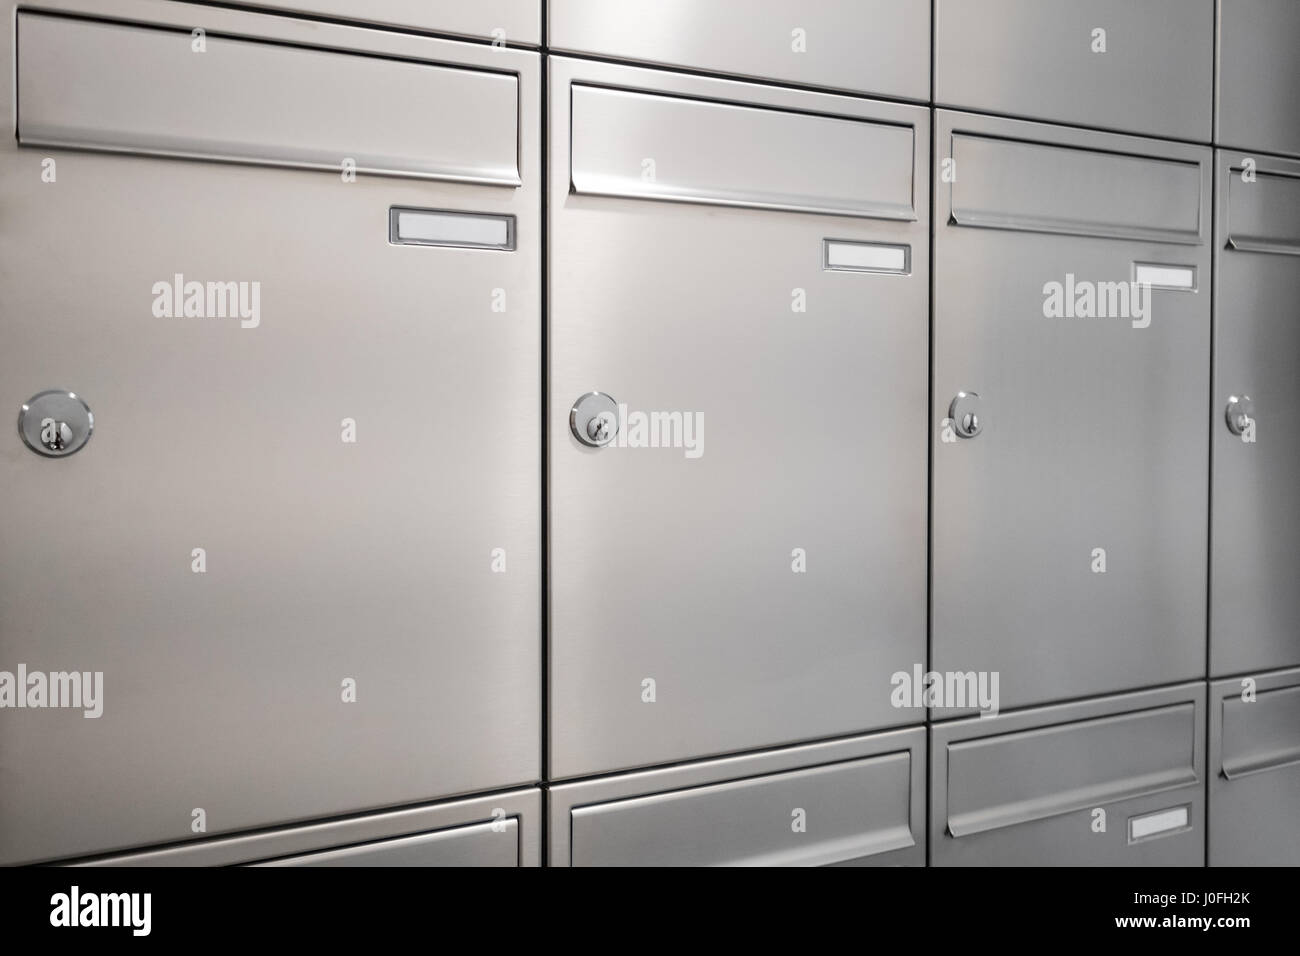 many new mailboxes / postbox / letterbox Stock Photo